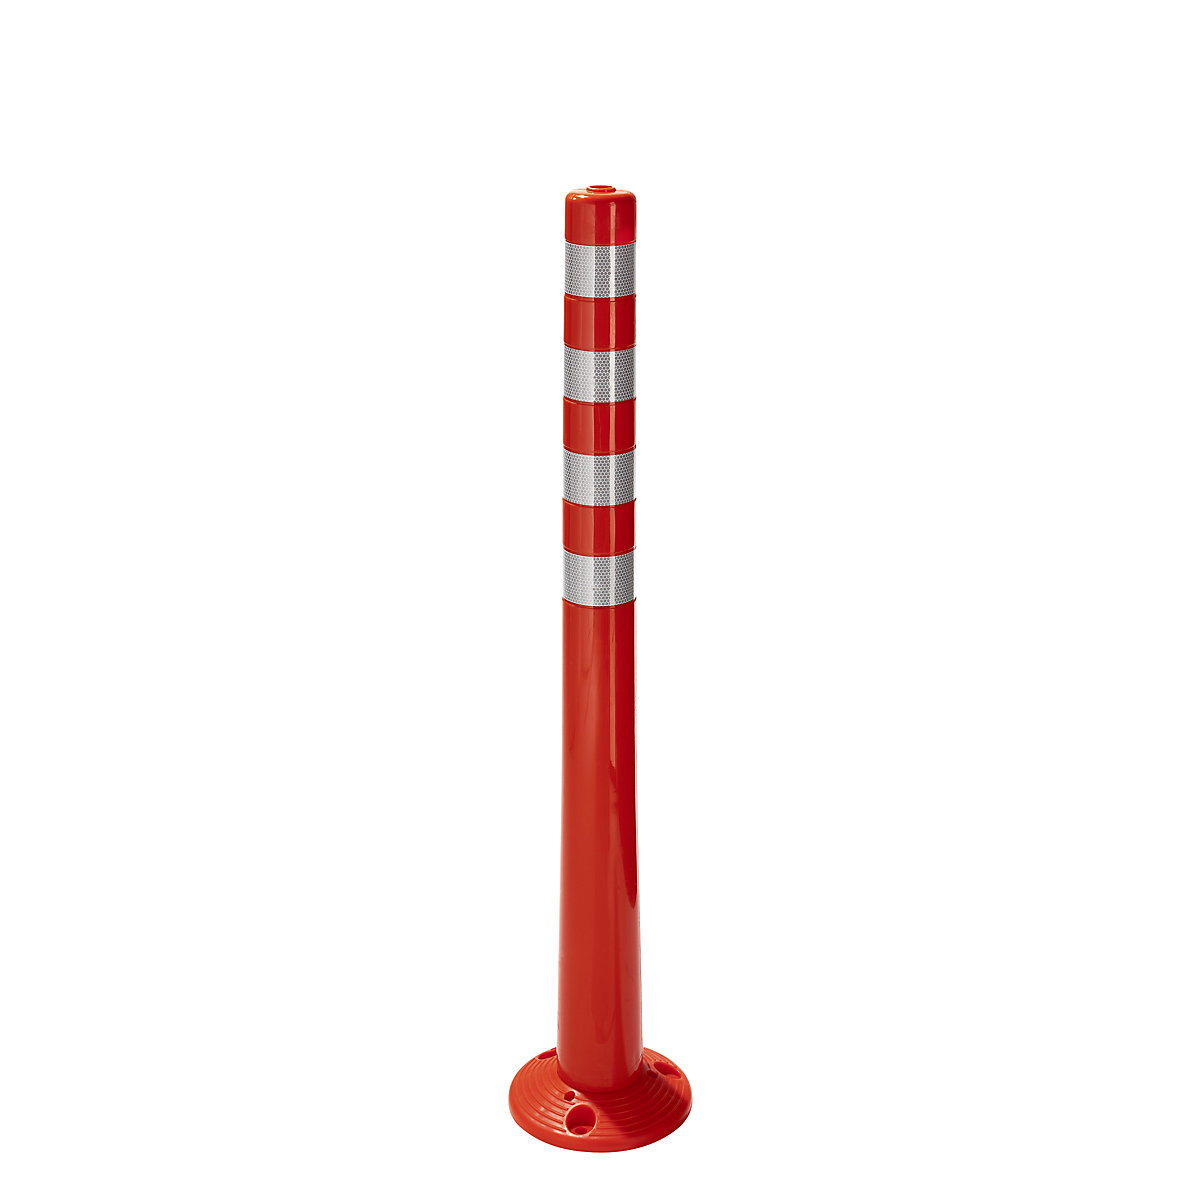 High visibility marking, bending, pack of 2